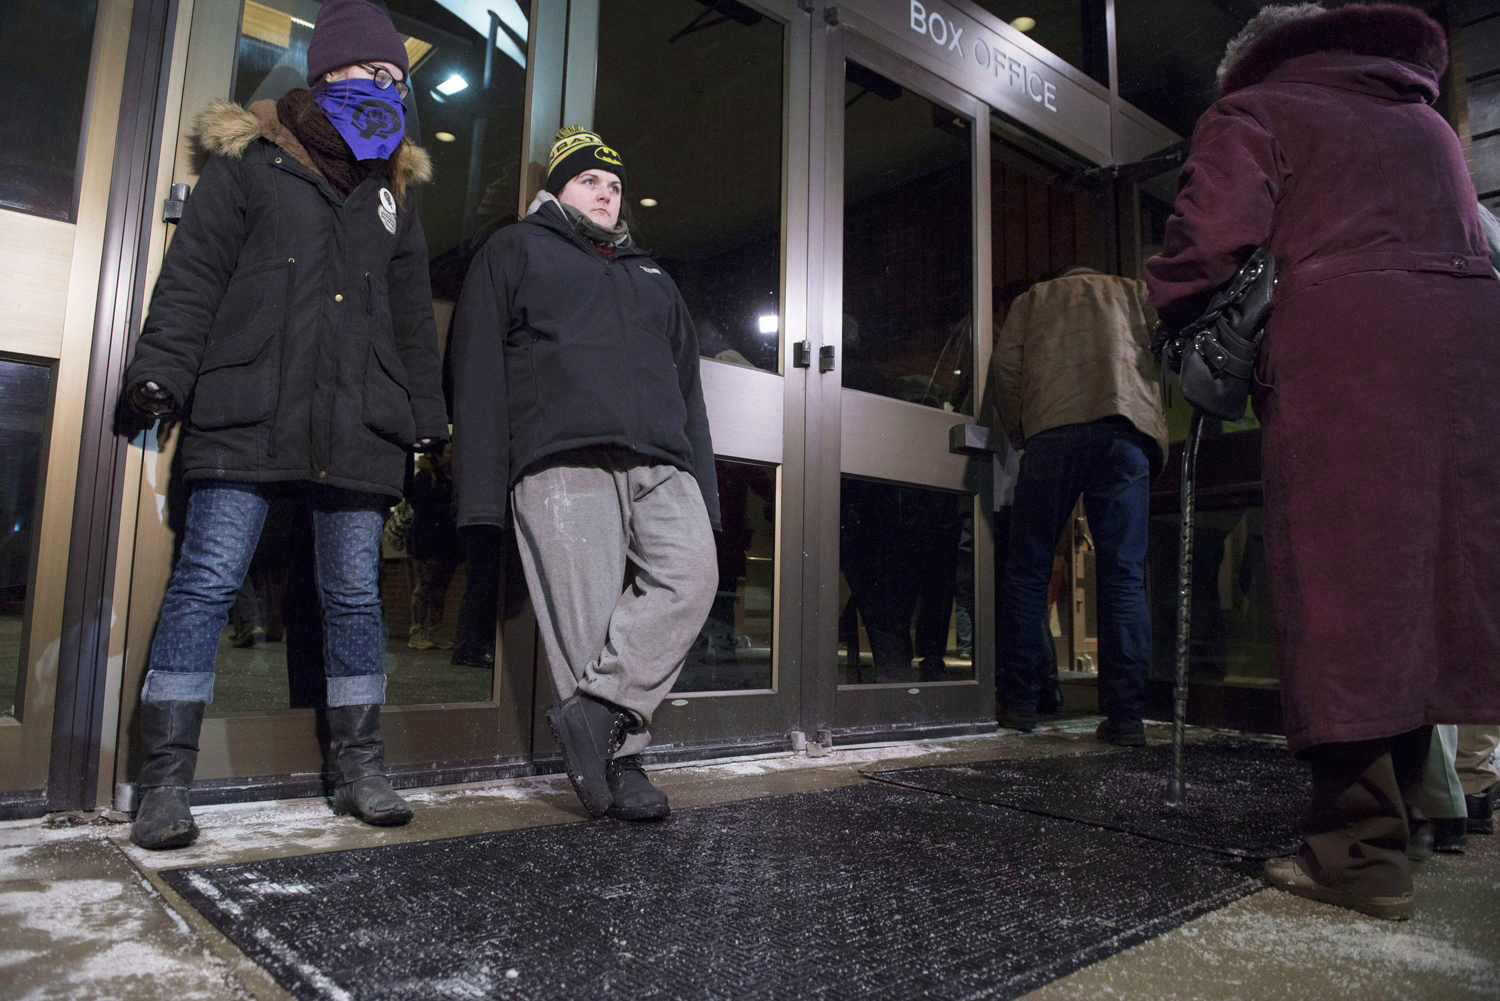 Protesters stand against doors at the entrance to the Centre in the Square theater in Kitchener, Ontario, Canada on Jan. 7, 2015 to protest Bill Cosby. (Hannah Yoon — AP)